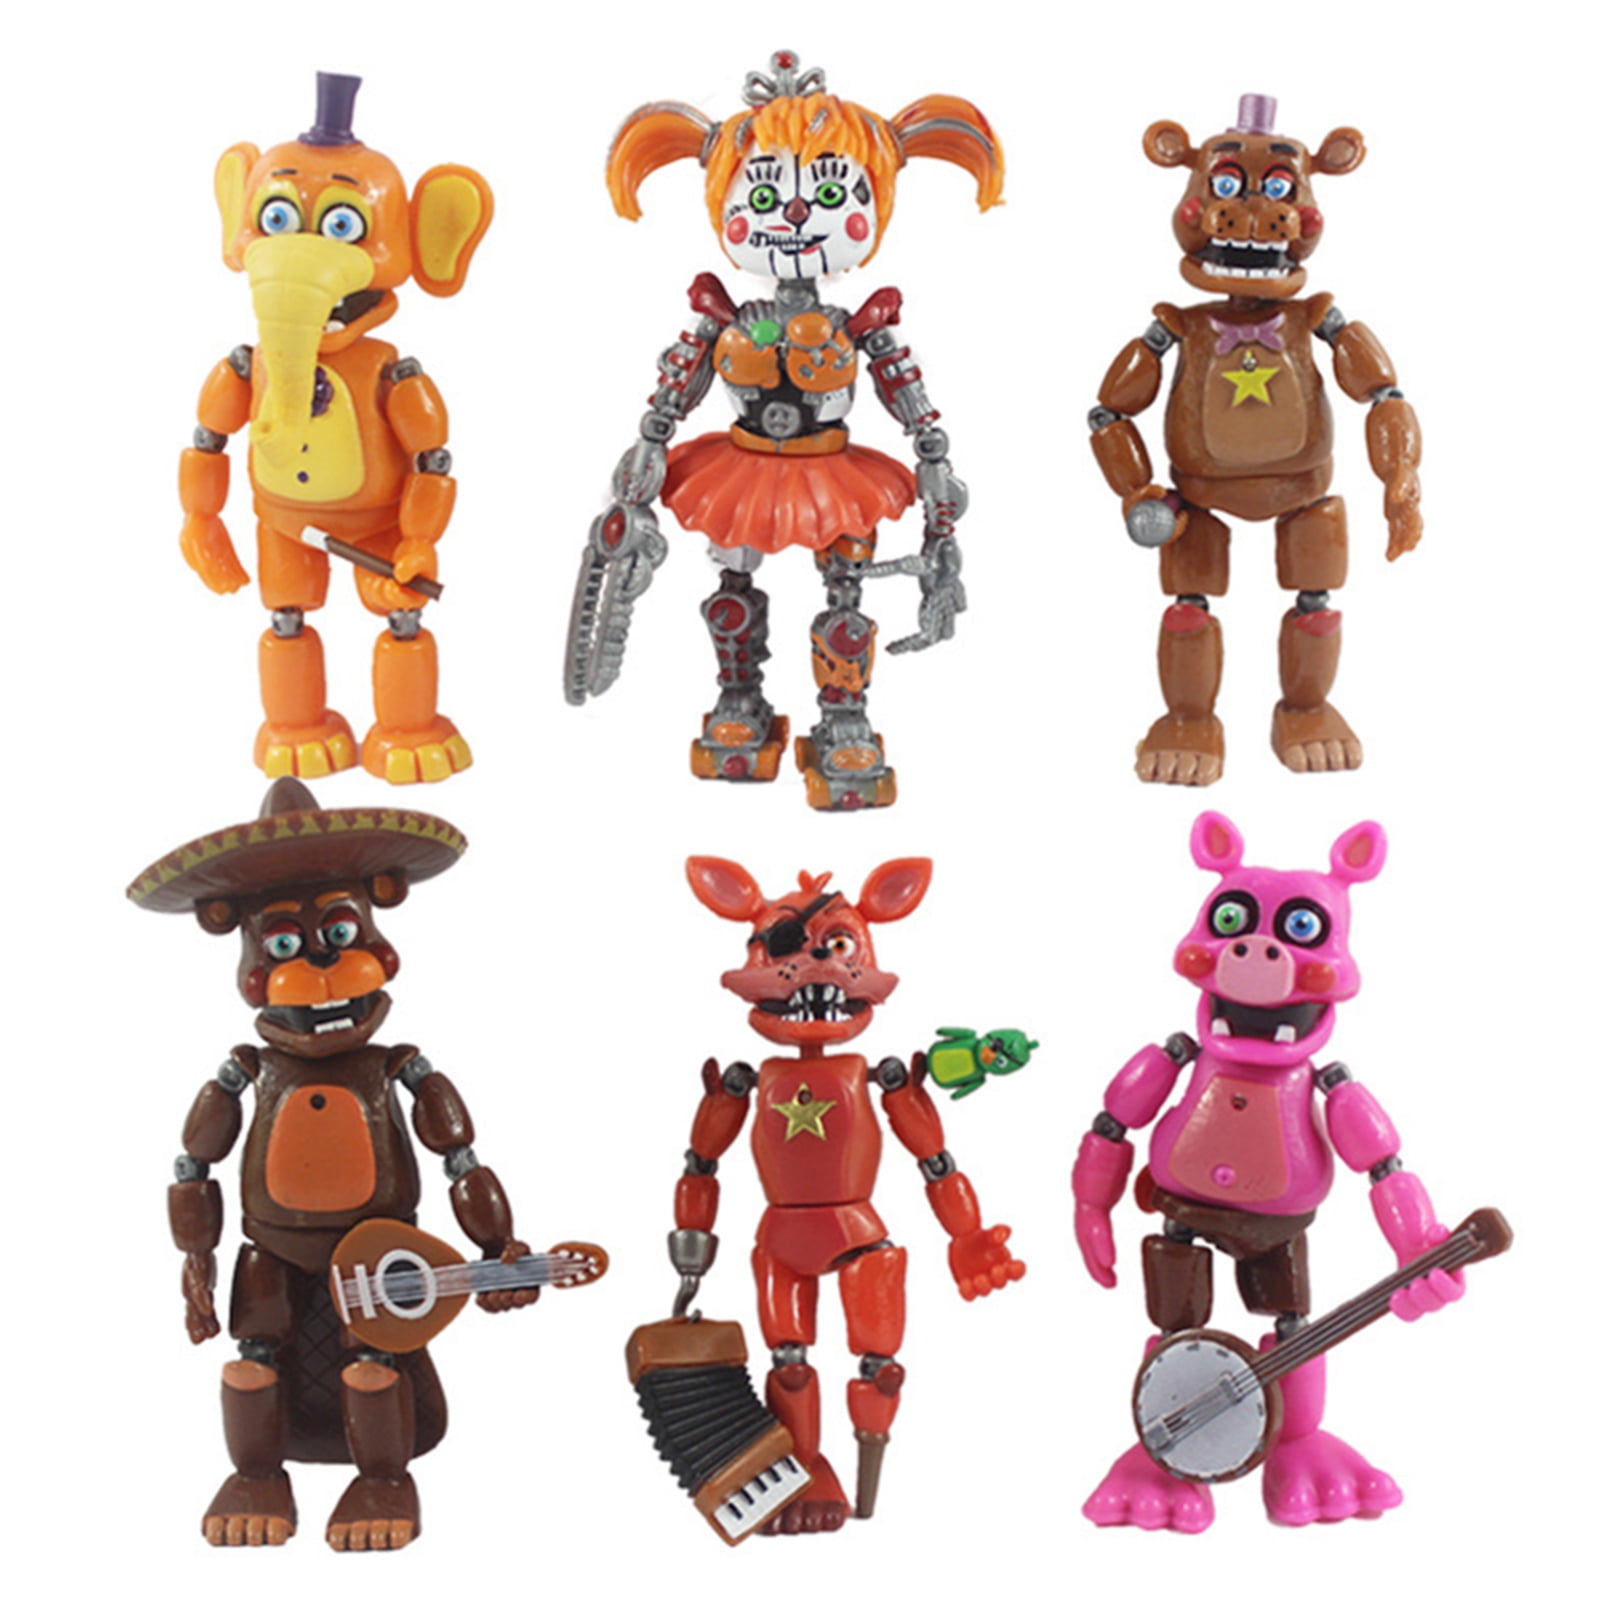 Five Nights at Freddys Nightmare 5" Set of 6 Action Figures Collectible 